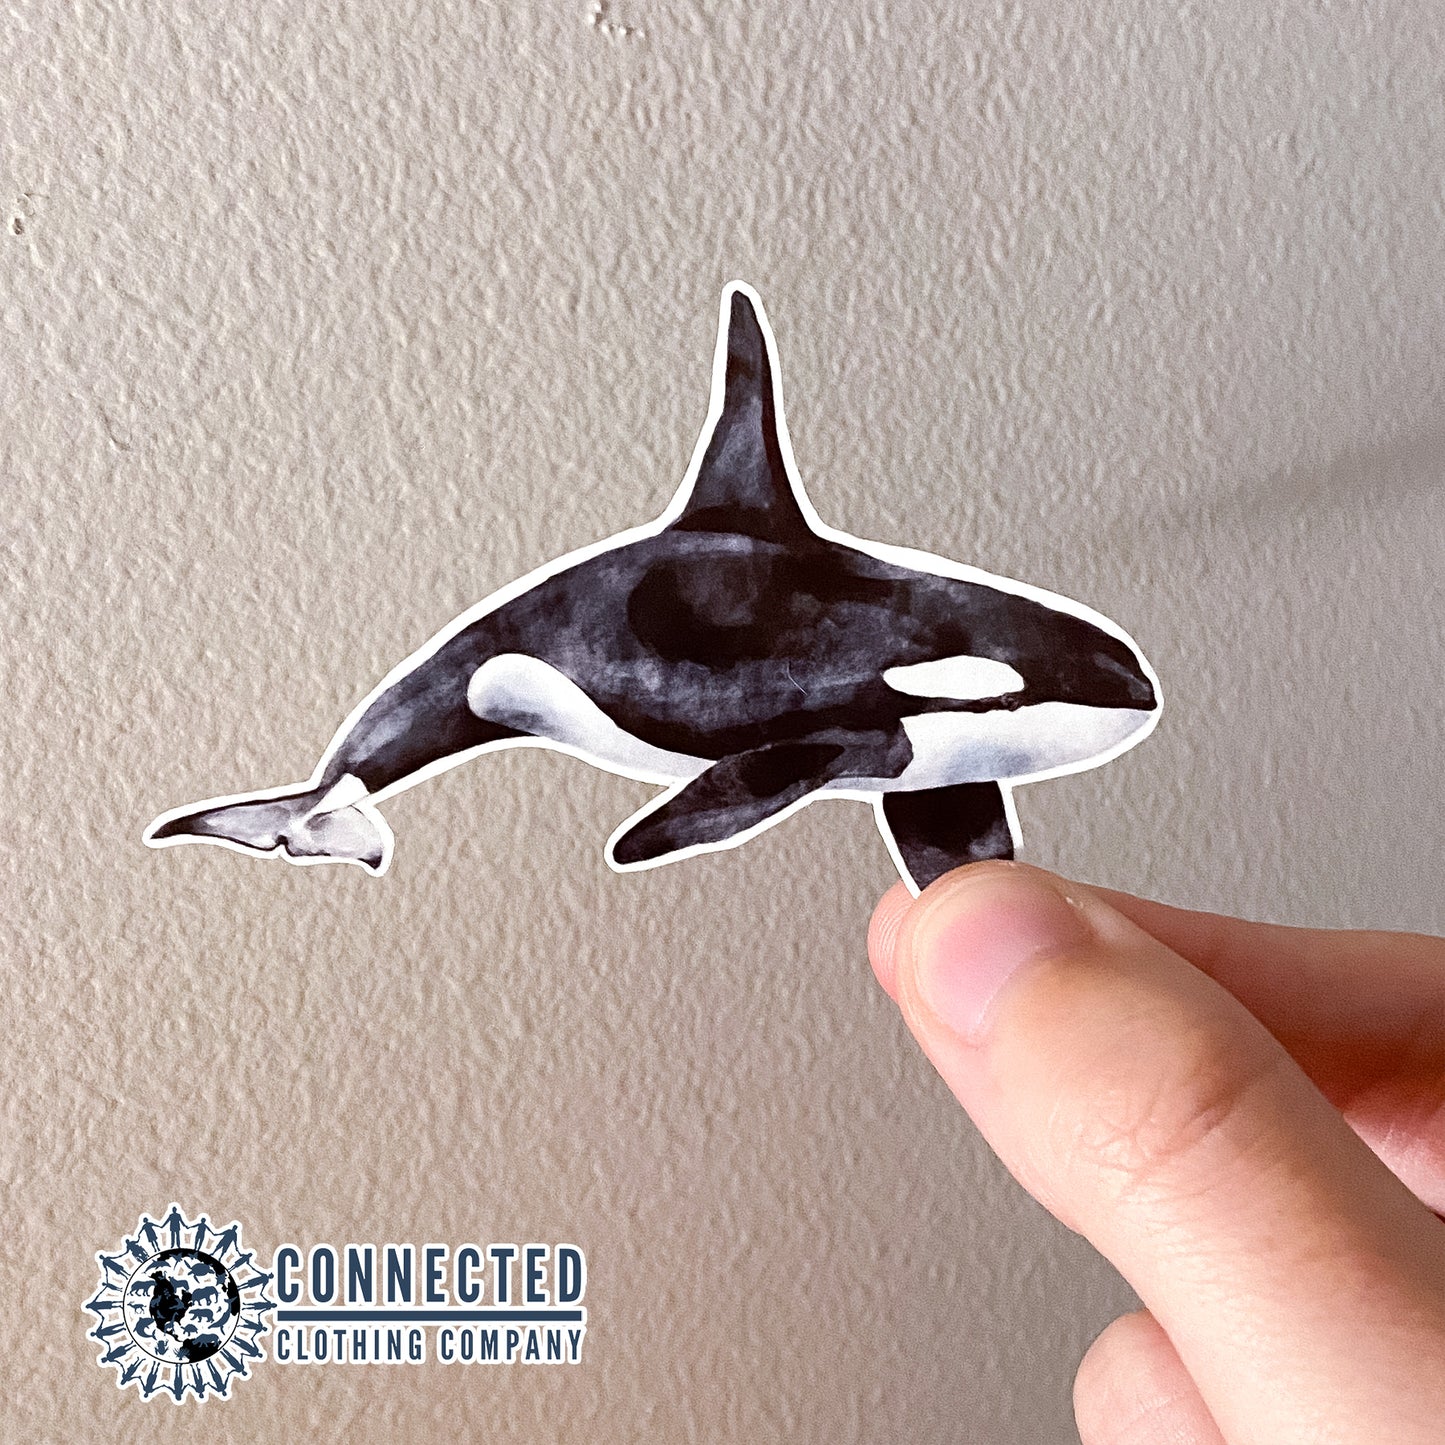 Orca Sticker - sweetsherriloudesigns - 10% of proceeds donated to Wild Orca nonprofit